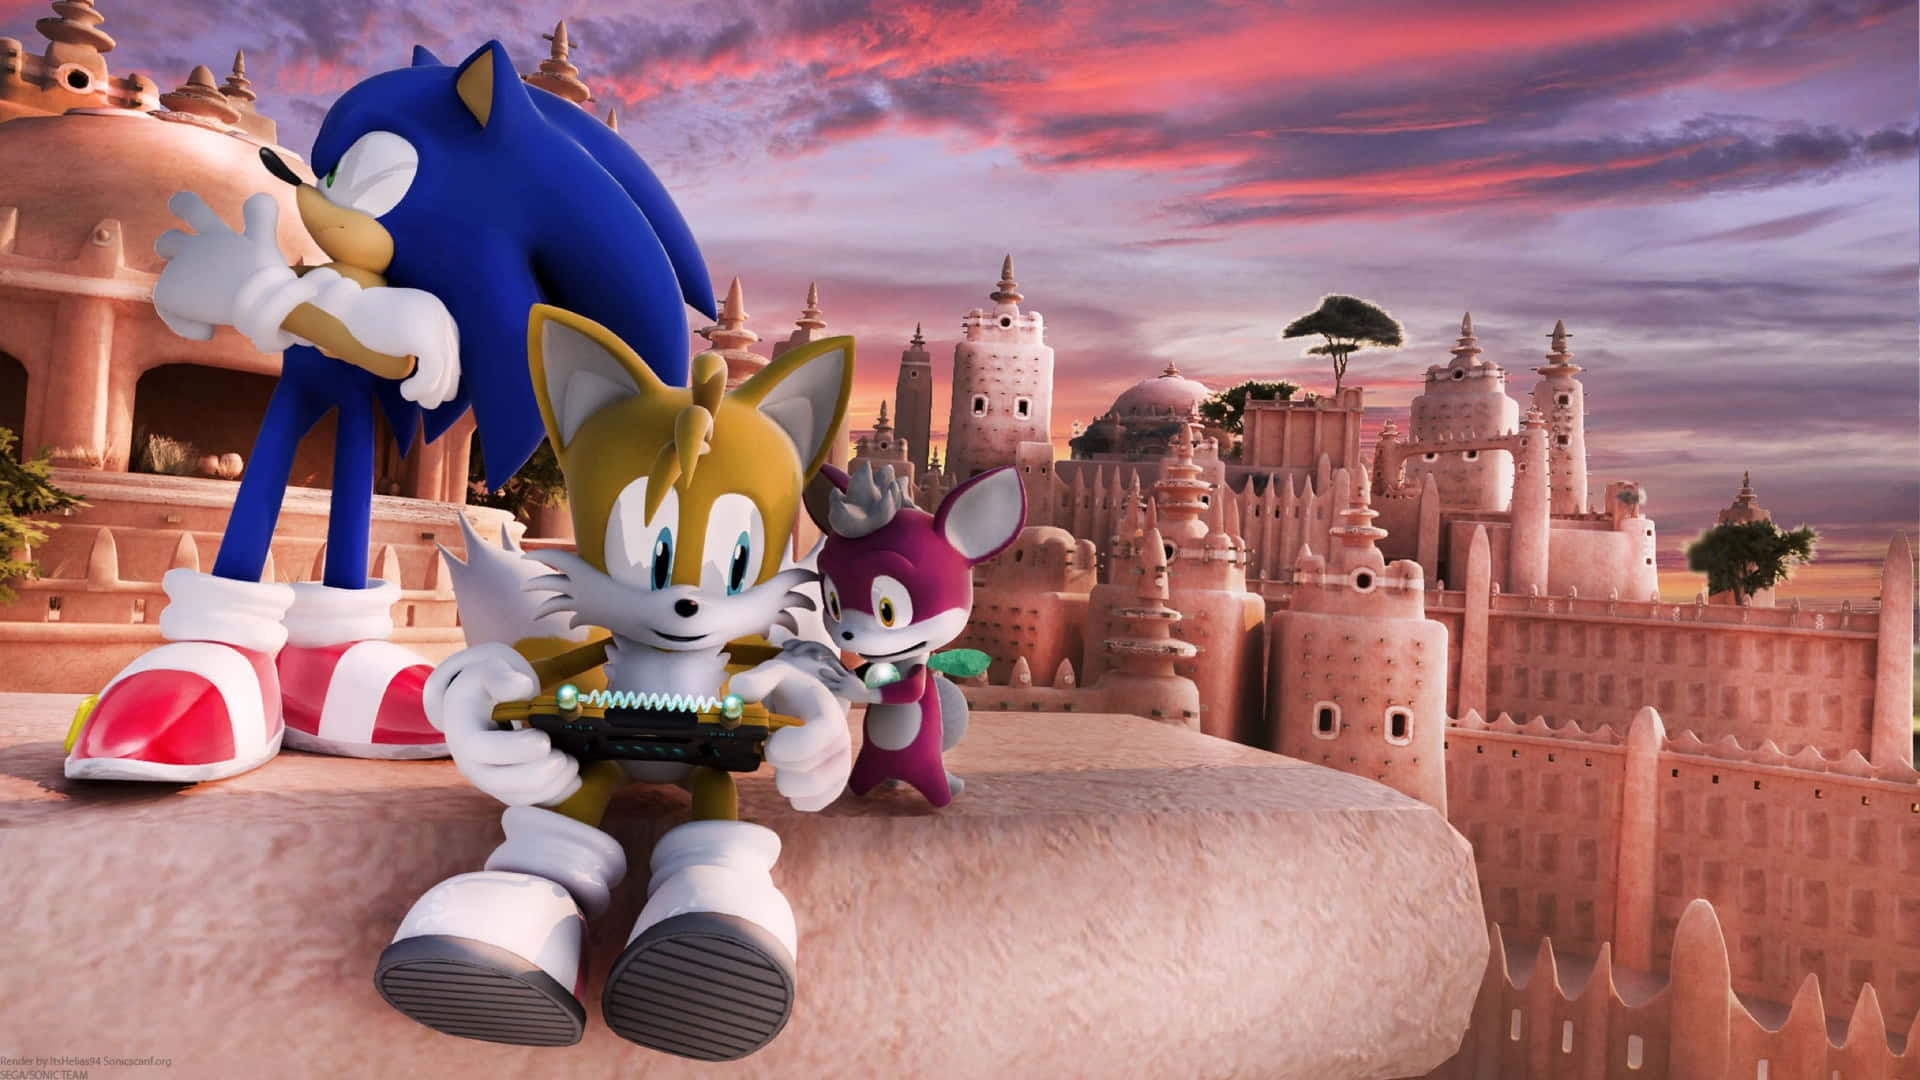 Sonic the Hedgehog and Tails zooming through a colorful and vivid landscape Wallpaper